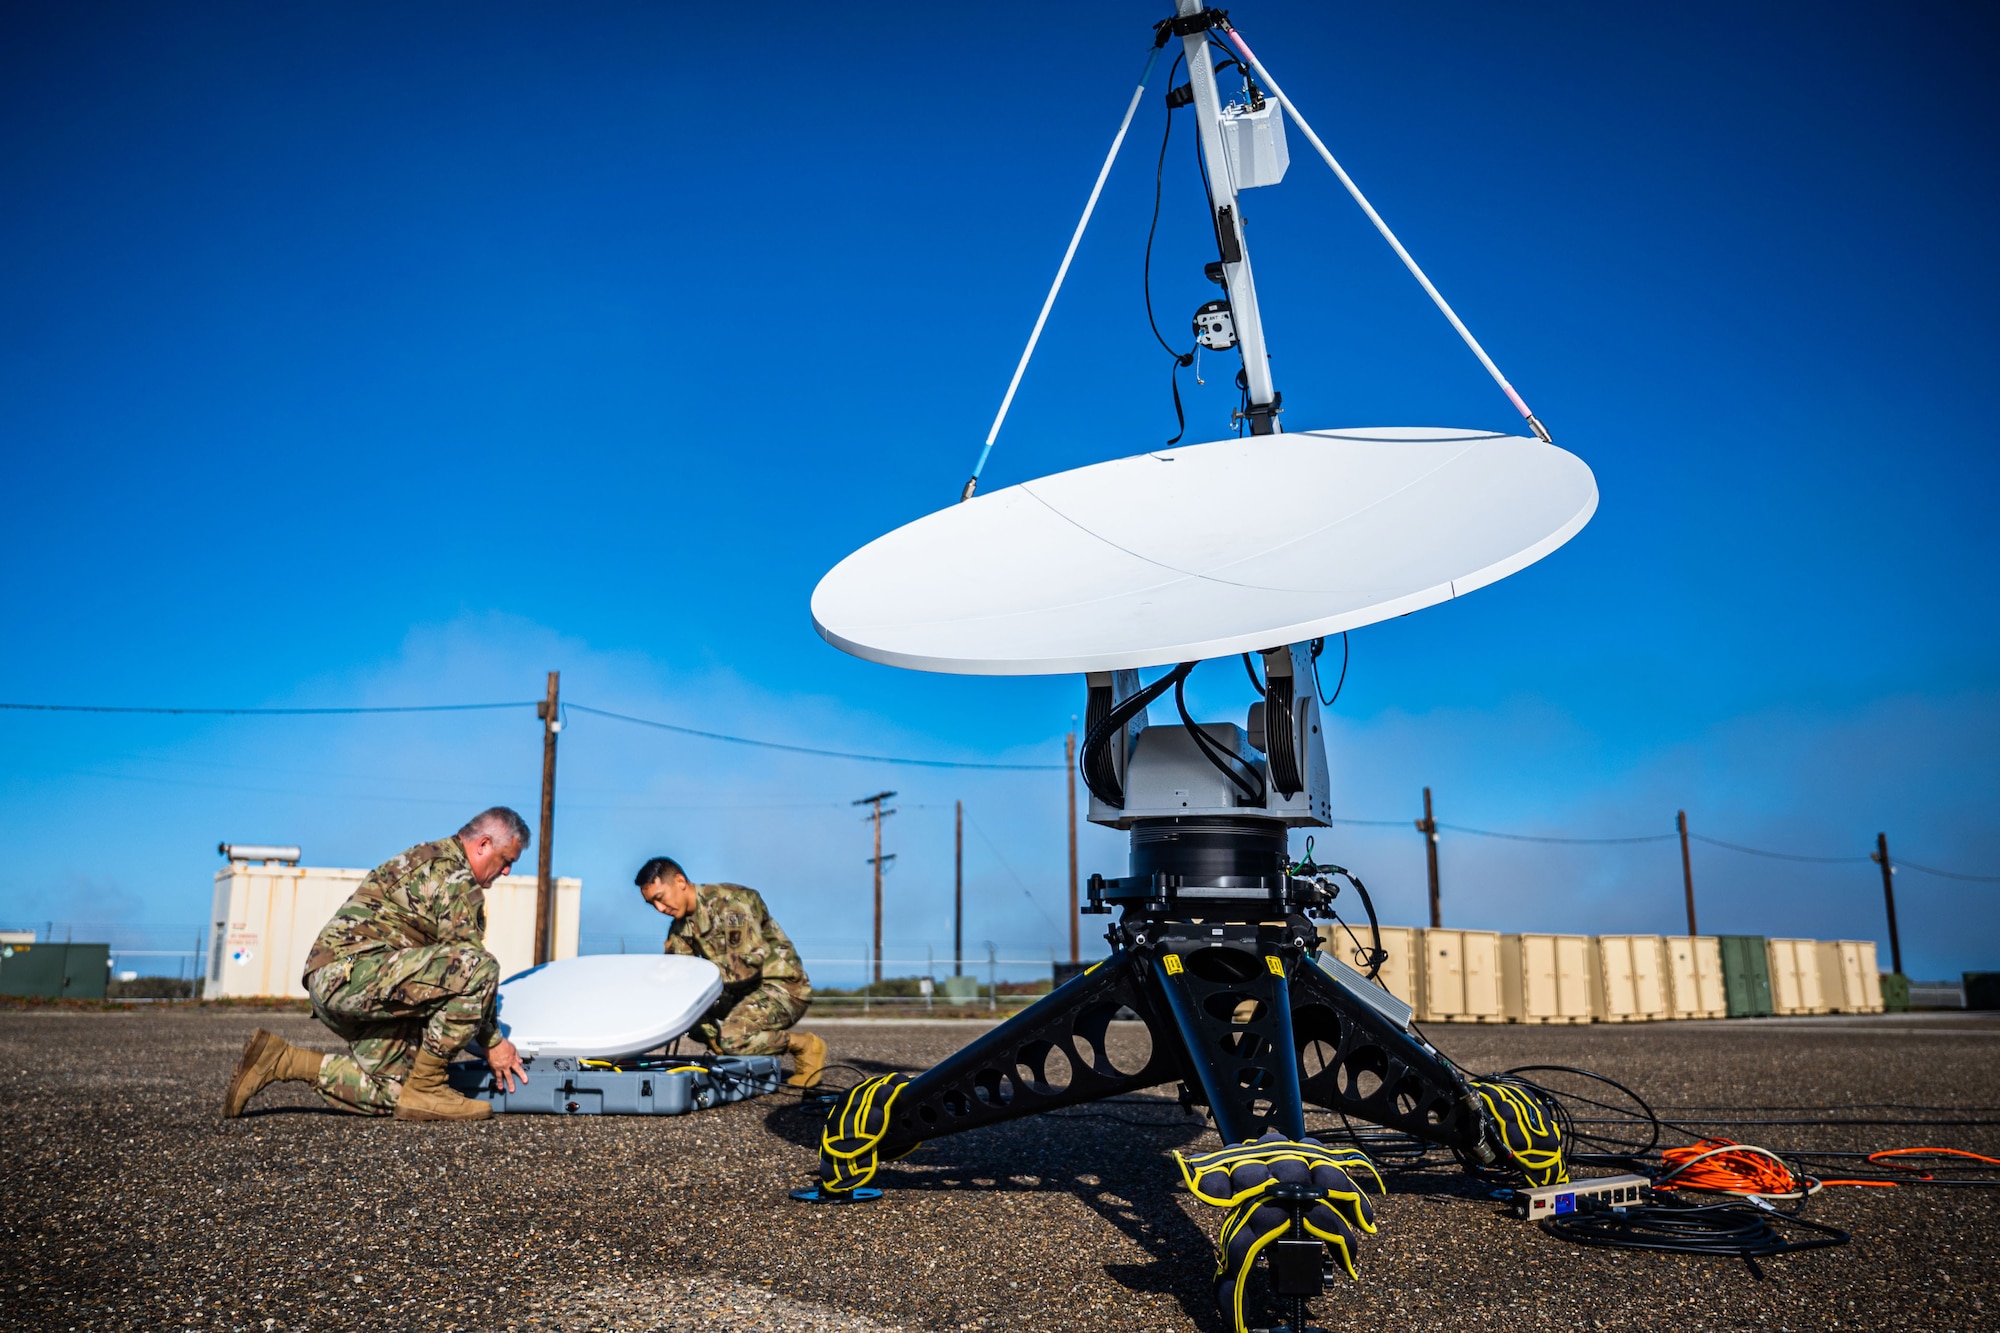 Two members of the 216th Space Control Squadron (SPCS) set up antennas as part of a ‘Honey Badger System’ during BLACK SKIES 22